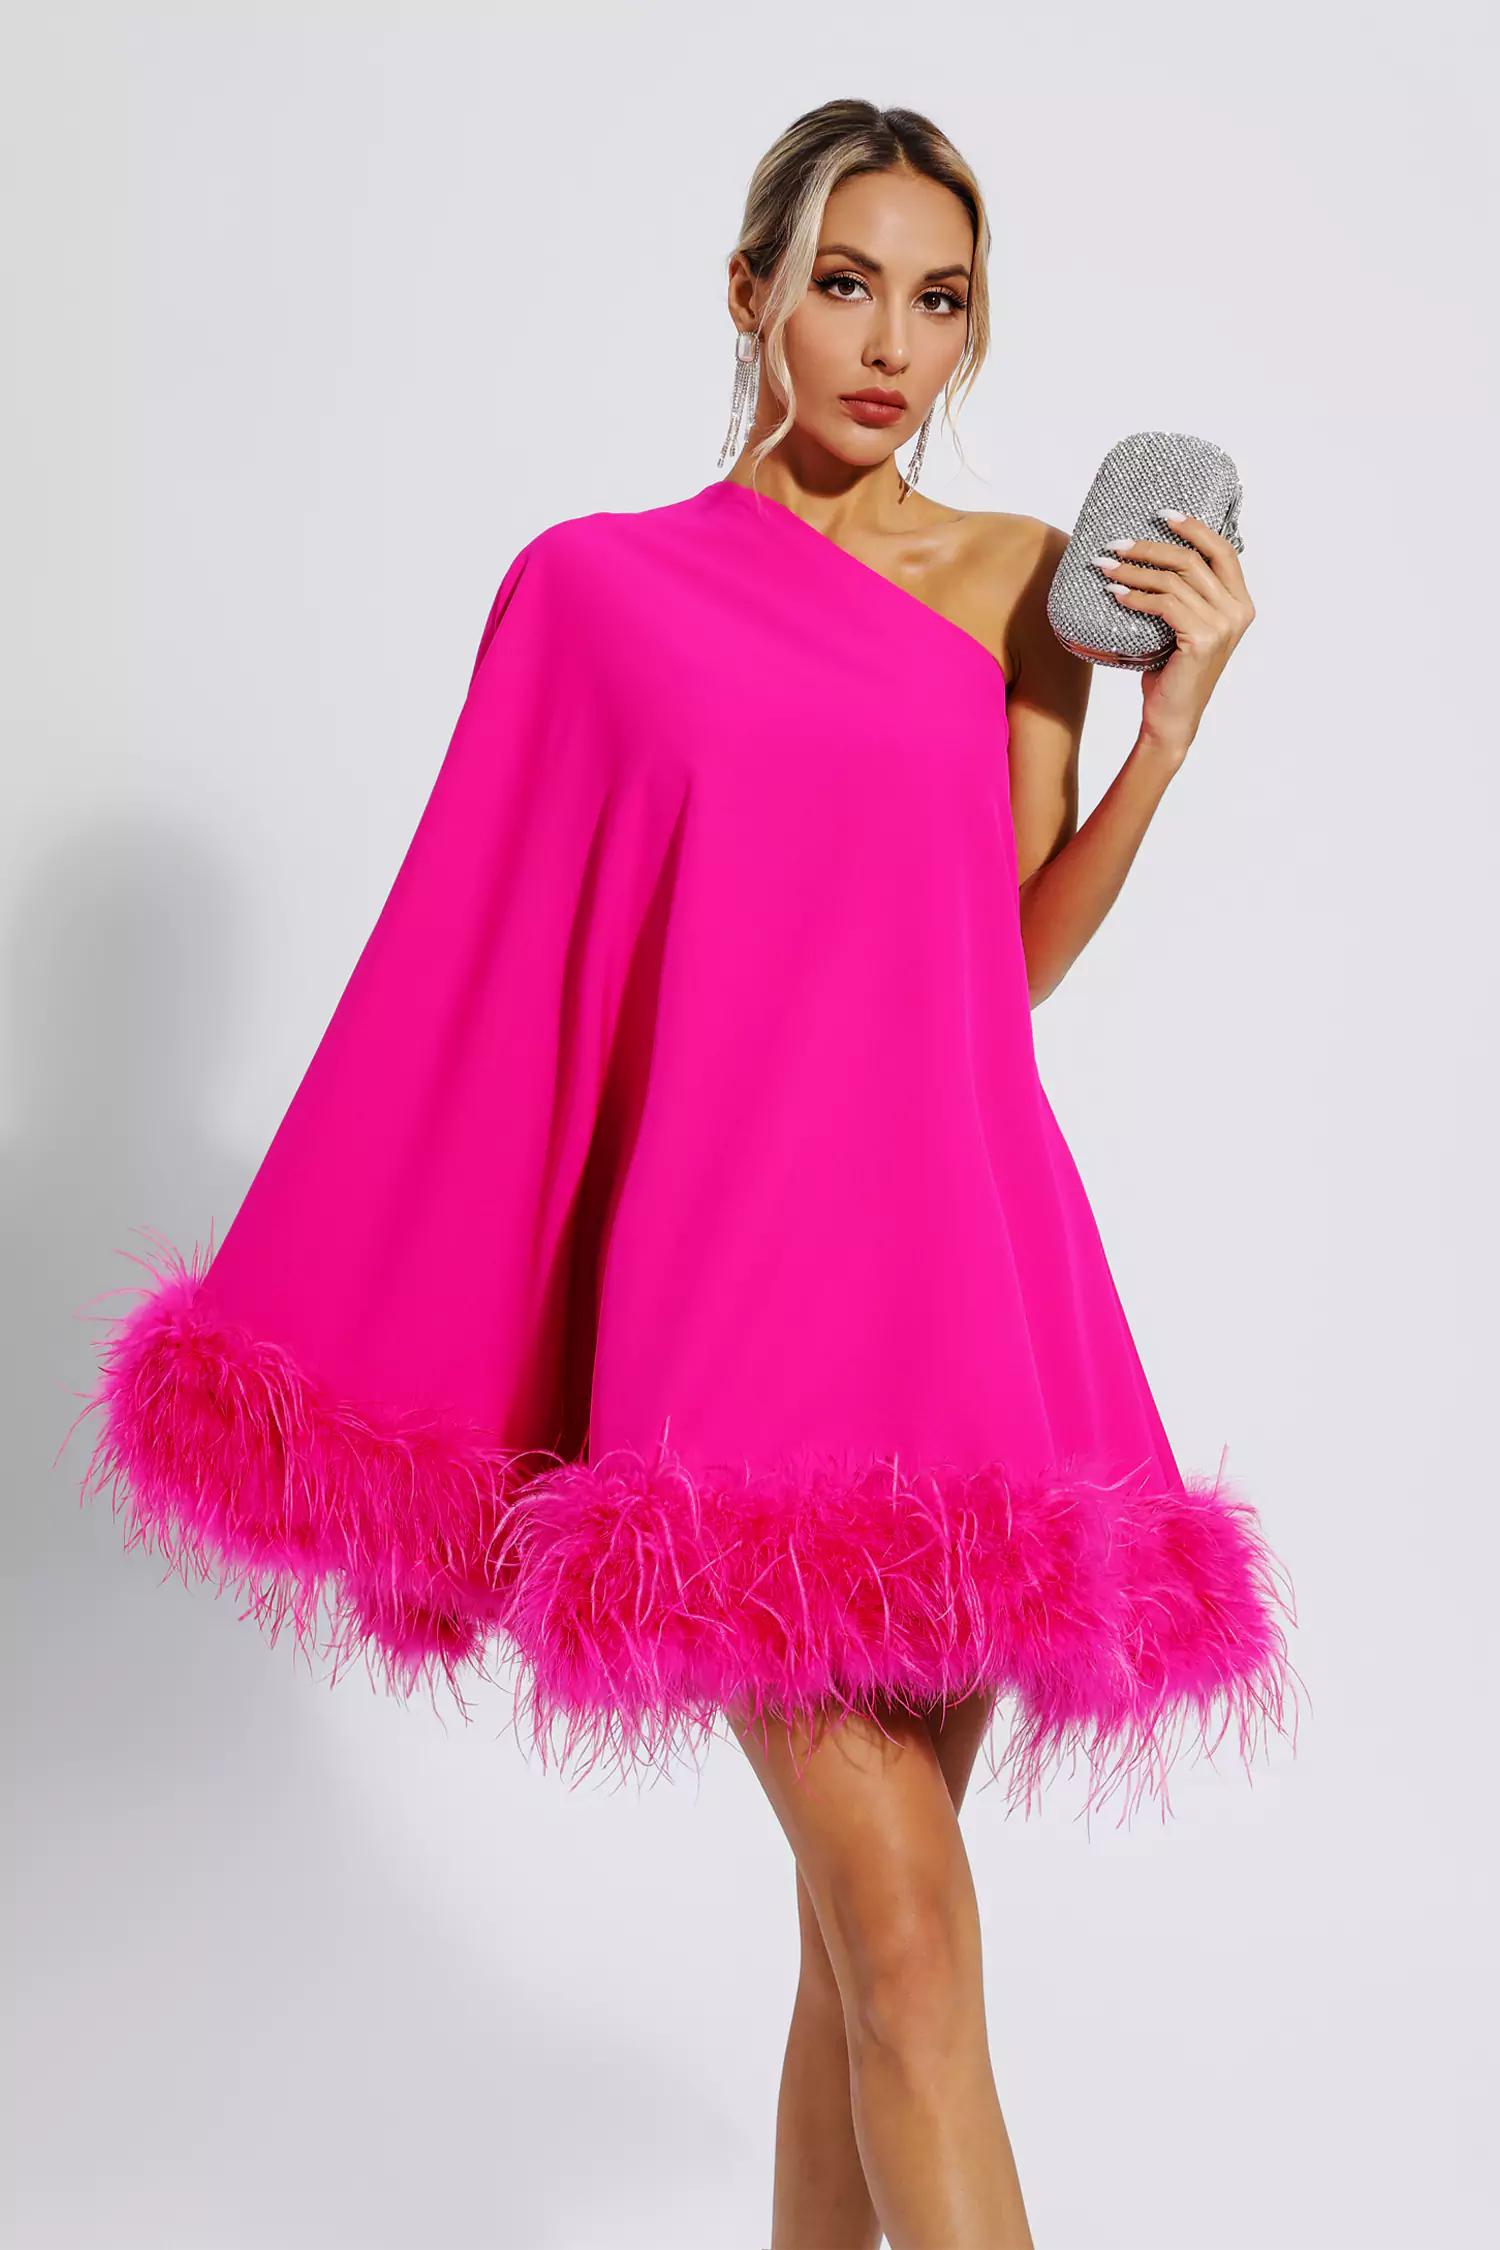 pink dress with feathers